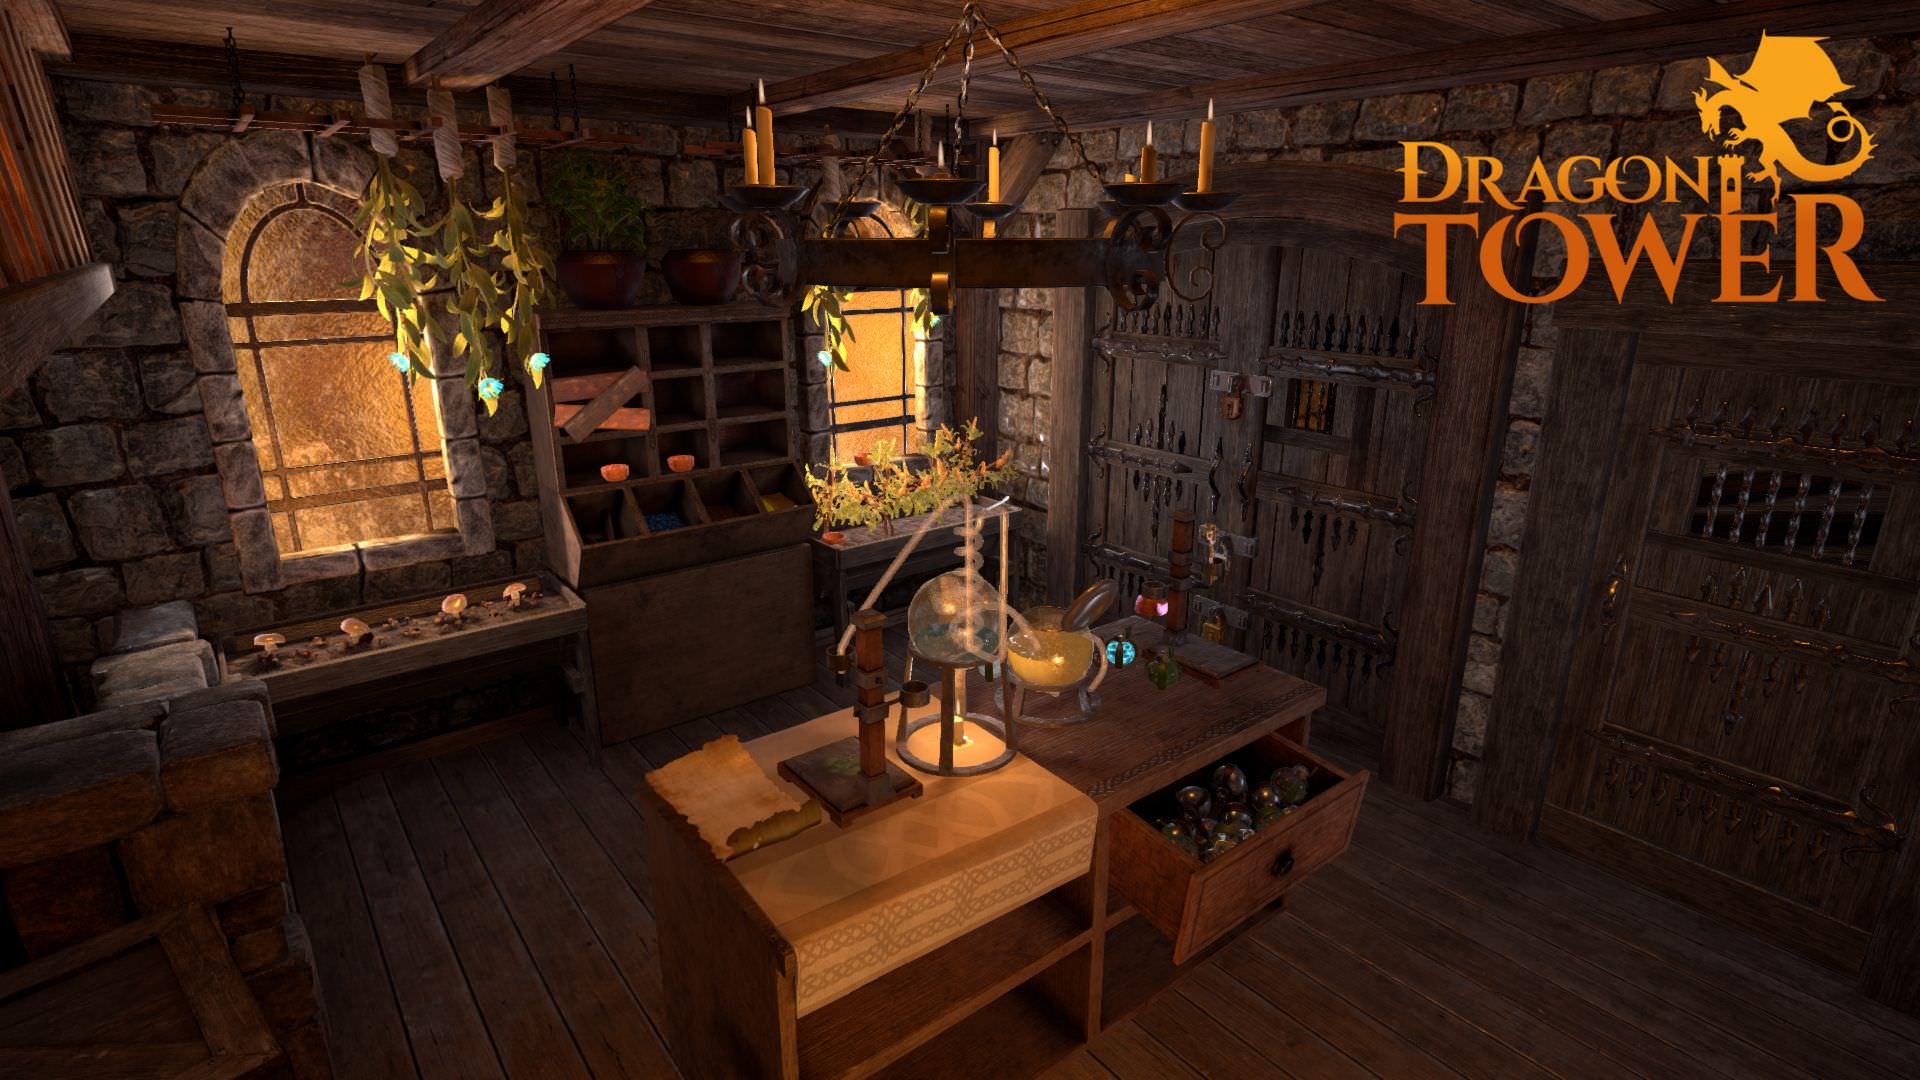 A virtual reality escape room in where players solve puzzles in a tower trying to escape the dragons.